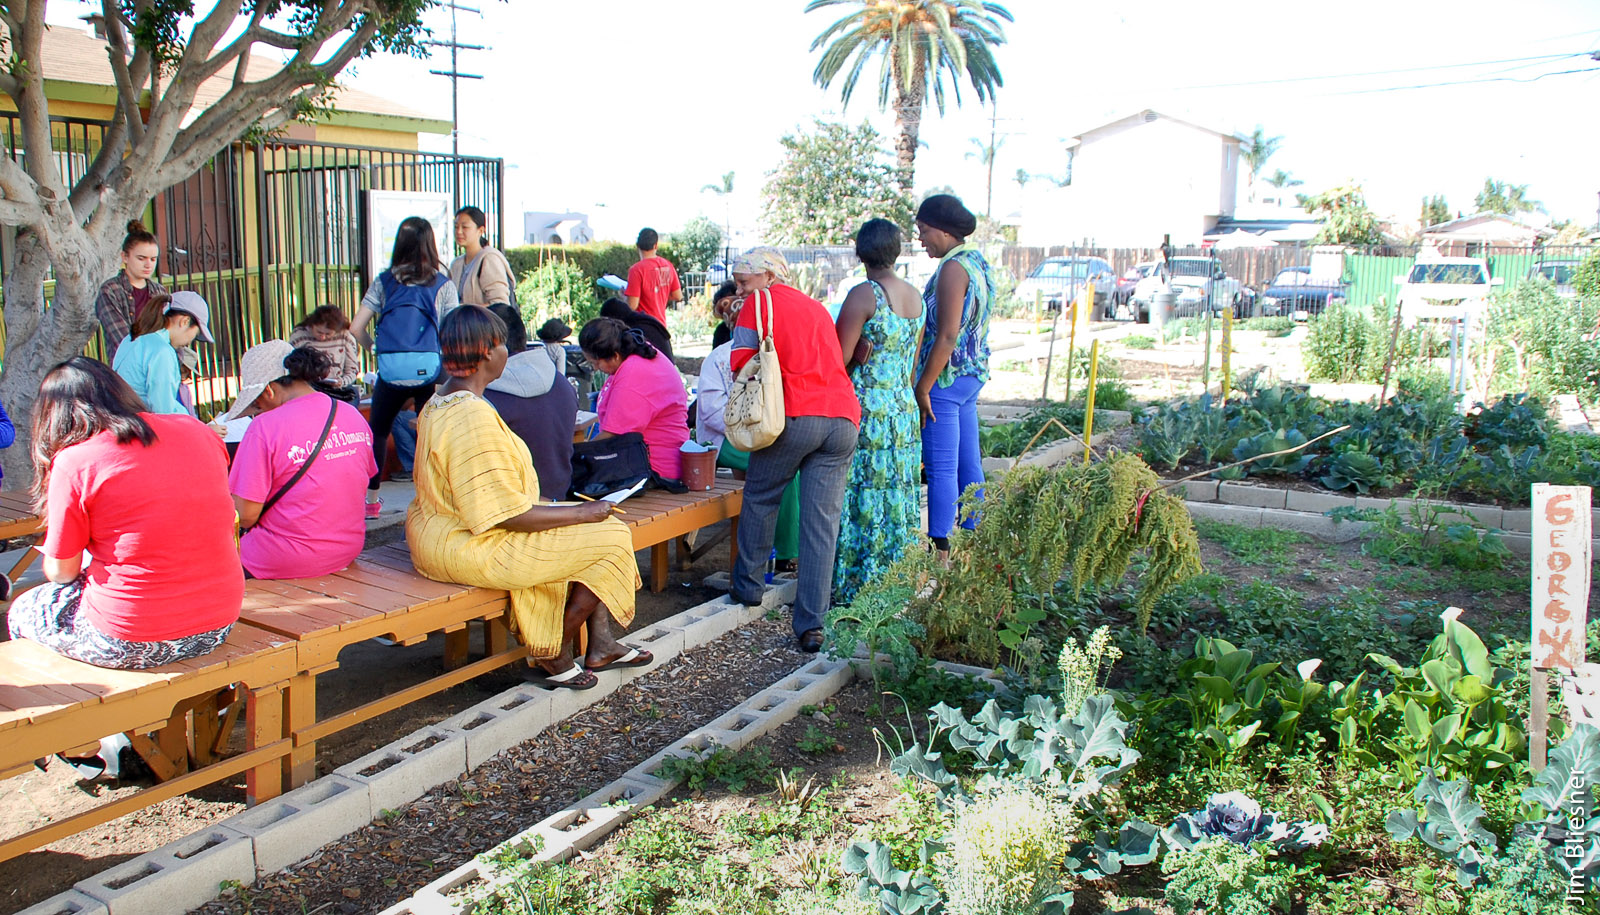 Under the authors' supervision, UC San Diego students administer a survey at City Heights Community Garden in San Diego on the role of community gardens in alternative food systems. In an earlier study in this neighborhood, the authors found a robust informal economy operating among community gardeners.